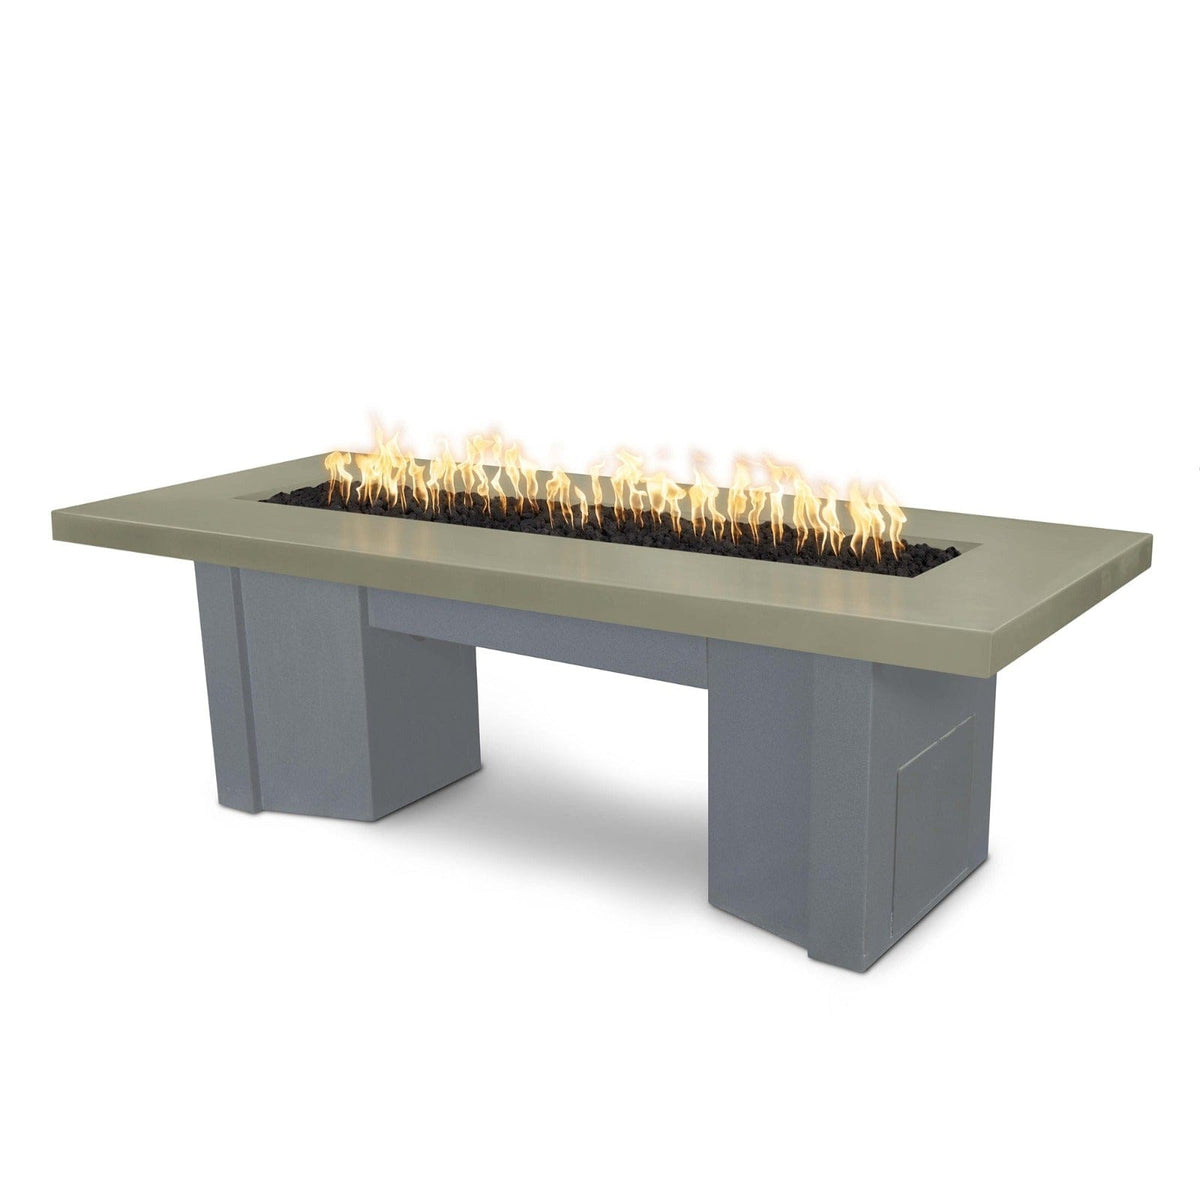 The Outdoor Plus Fire Features Ash (-ASH) / Gray Powder Coated Steel (-GRY) The Outdoor Plus 60&quot; Alameda Fire Table Smooth Concrete in Liquid Propane - Match Lit with Flame Sense System / OPT-ALMGFRC60FSML-LP